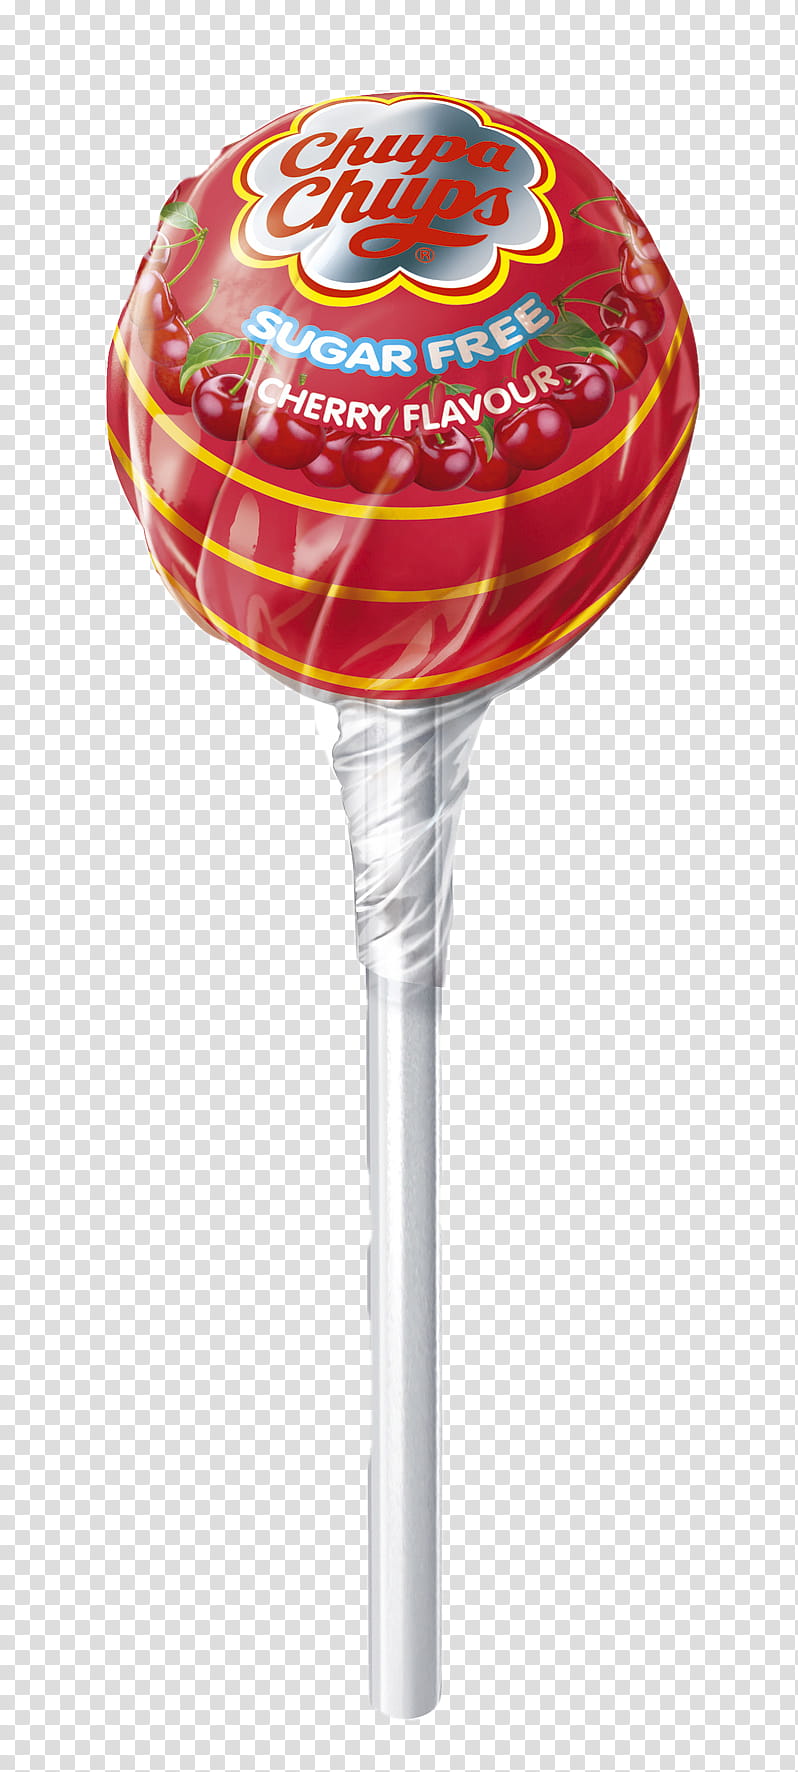 Lollipop, Chupa Chups, Candy, Food, Perfetti Van Melle, Tootsie Pop, Personalised Face Lollipop, Stick Candy transparent background PNG clipart